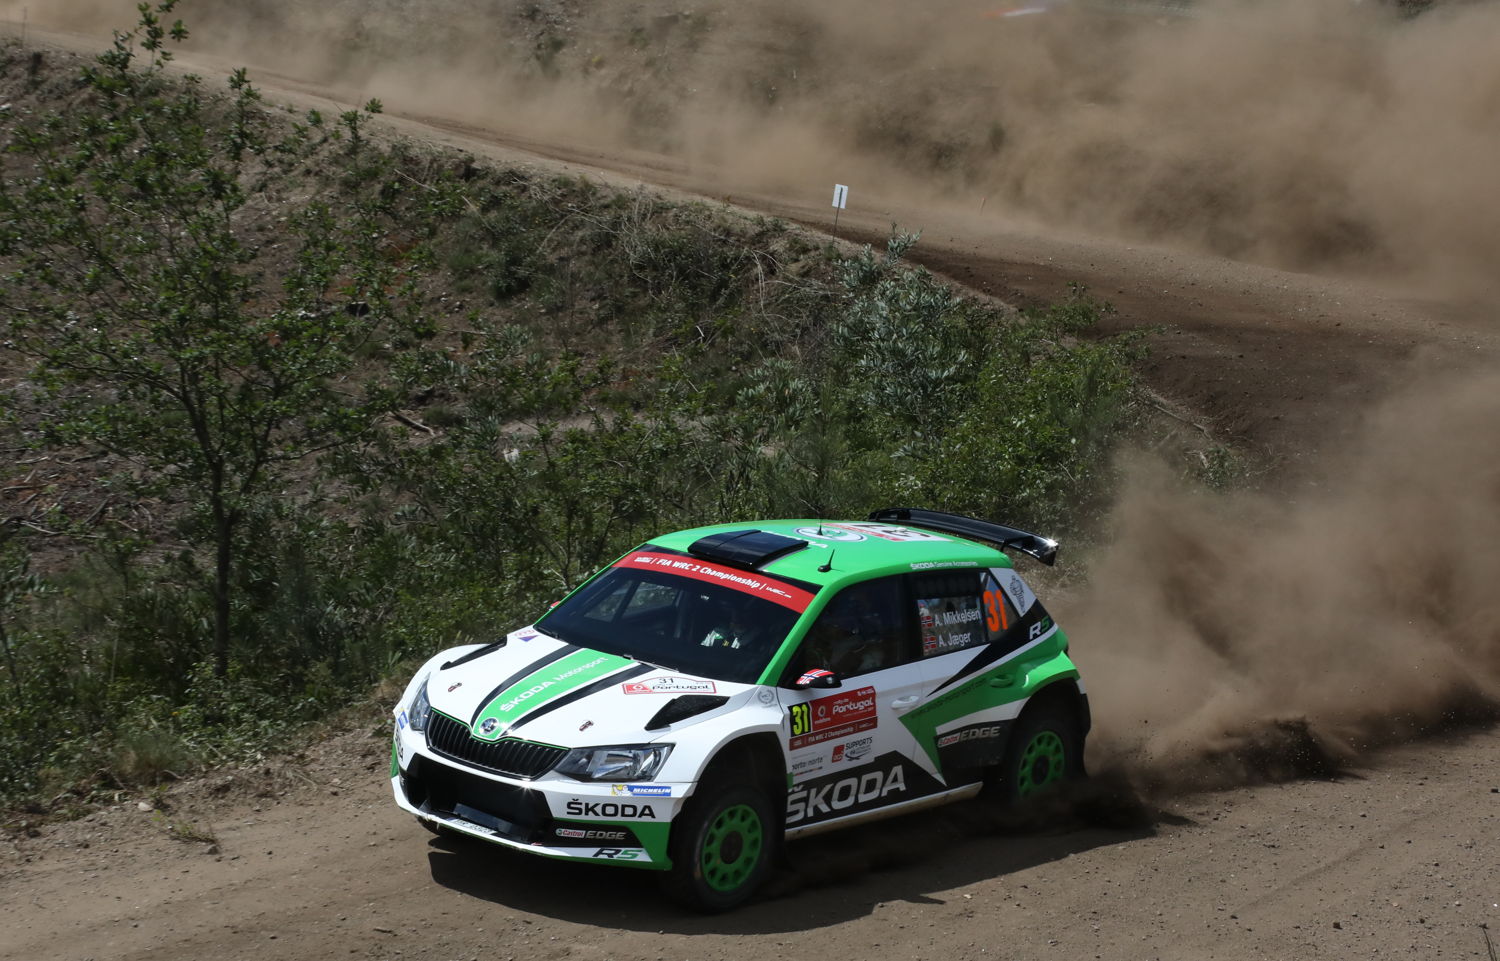 Pontus Tidemand and co-driver Jonas Andersson currently holding second position in WRC 2 at Rally Portugal 2017 driving a ŠKODA FABIA R5